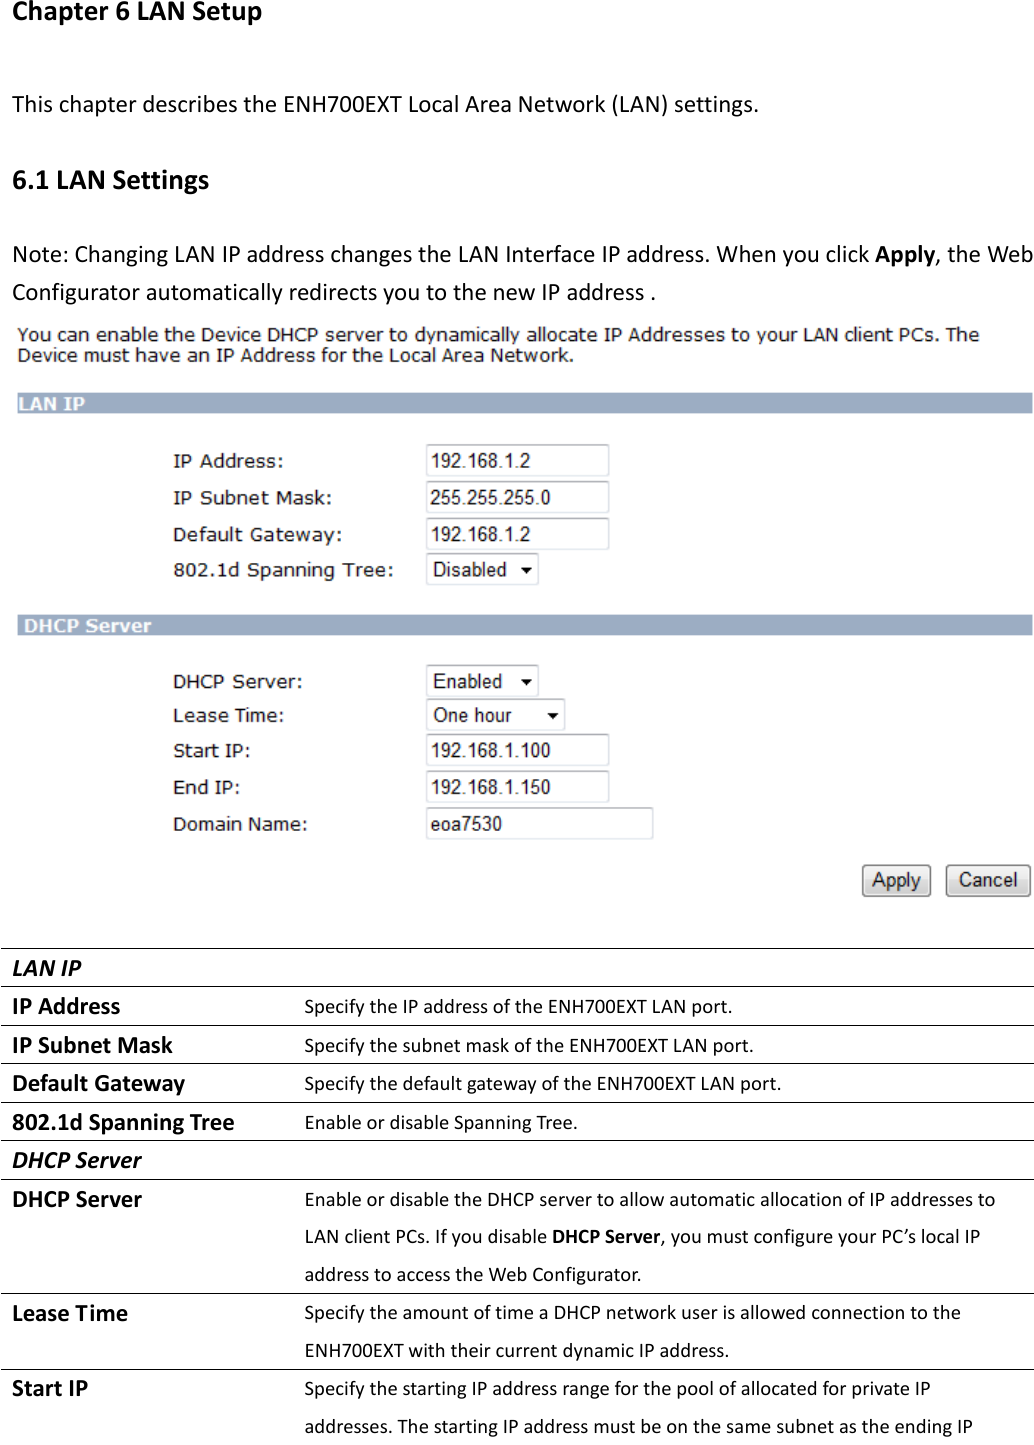 Chapter 6 LAN Setup This chapter describes the ENH700EXT Local Area Network (LAN) settings. 6.1 LAN Settings Note: Changing LAN IP address changes the LAN Interface IP address. When you click Apply, the Web Configurator automatically redirects you to the new IP address .   LAN IP   IP Address Specify the IP address of the ENH700EXT LAN port. IP Subnet Mask Specify the subnet mask of the ENH700EXT LAN port. Default Gateway Specify the default gateway of the ENH700EXT LAN port. 802.1d Spanning Tree Enable or disable Spanning Tree. DHCP Server   DHCP Server Enable or disable the DHCP server to allow automatic allocation of IP addresses to LAN client PCs. If you disable DHCP Server, you must configure your PC’s local IP address to access the Web Configurator.   Lease Time Specify the amount of time a DHCP network user is allowed connection to the ENH700EXT with their current dynamic IP address. Start IP Specify the starting IP address range for the pool of allocated for private IP addresses. The starting IP address must be on the same subnet as the ending IP 